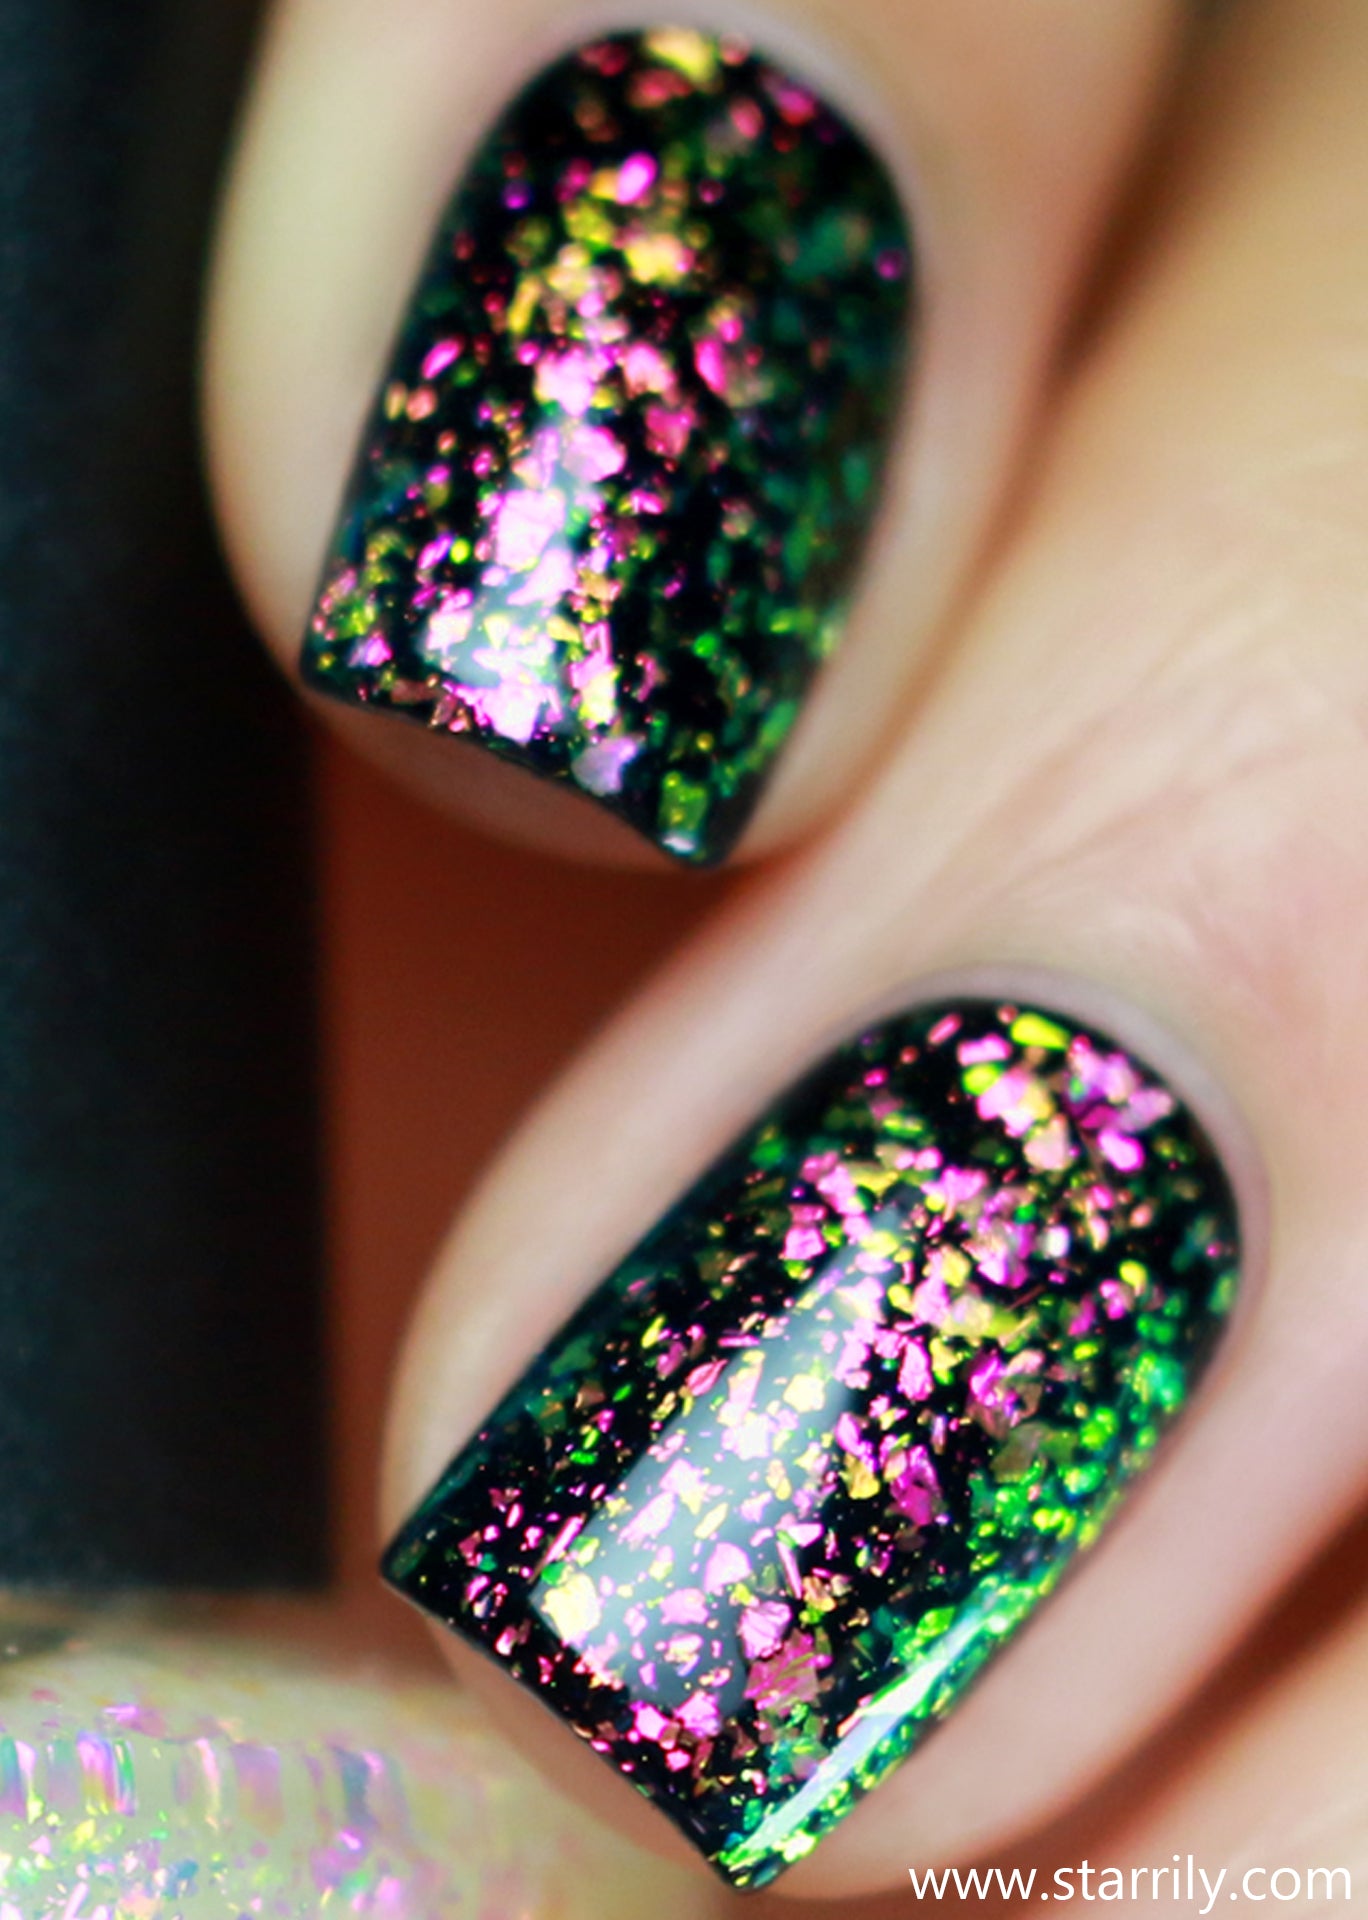 Enchanted is an enchanting colorshifting iridescent topper with magical flakes